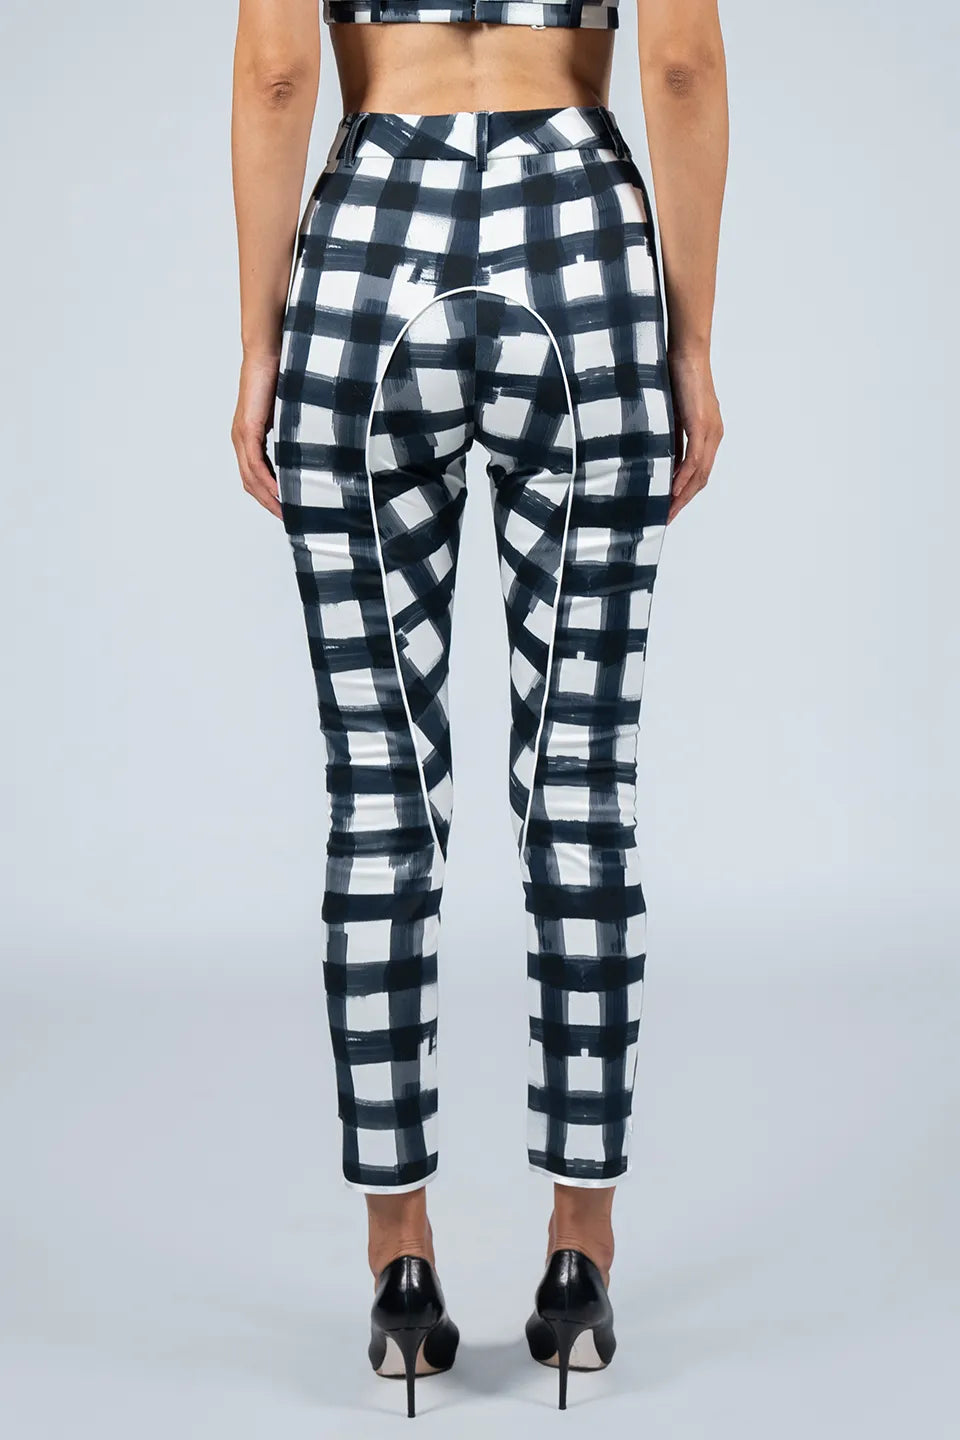 Designer Blue Women pants, shop online with free delivery in UAE. Product gallery 4